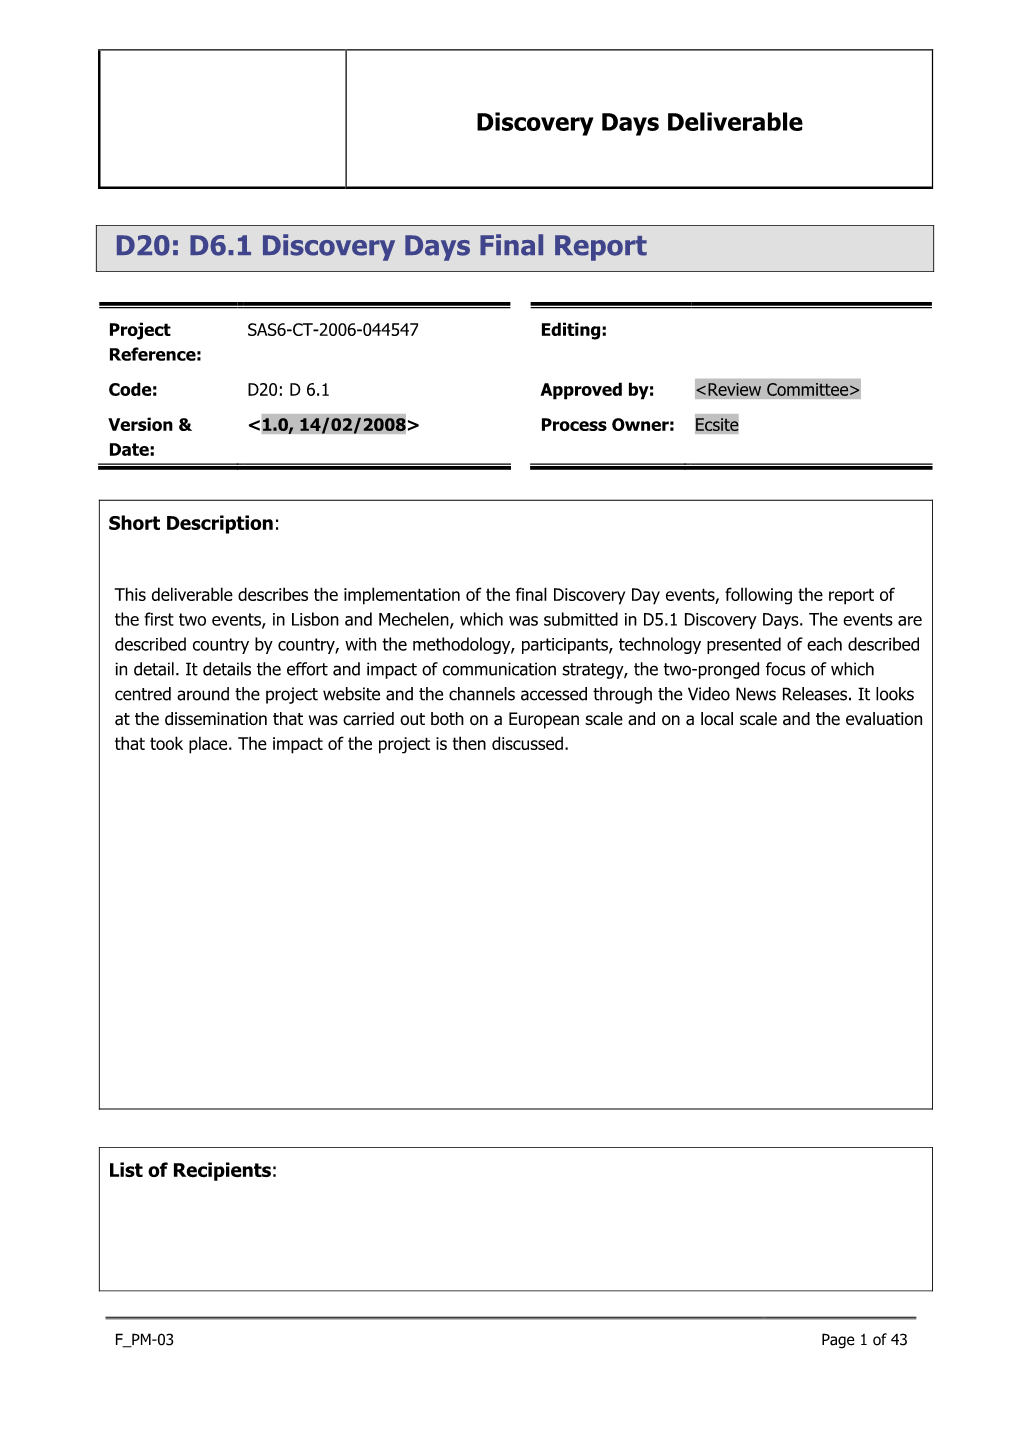 D20: D6.1 Discovery Days Final Report